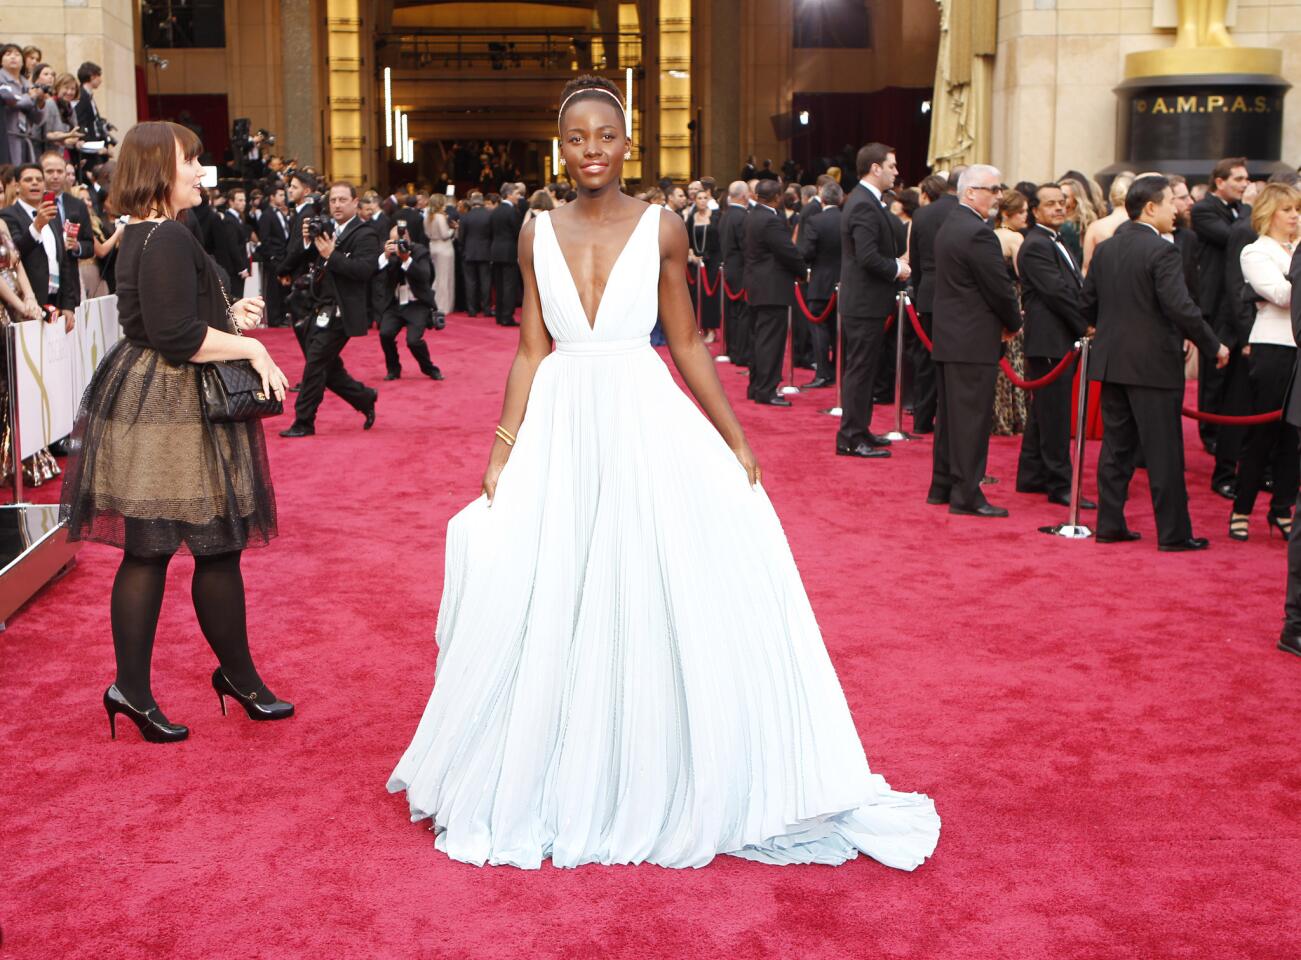 Lupita Nyong'o, who won the supporting actress award for "12 Years a Slave," wore a custom Prada light blue silk gown to the Oscars.